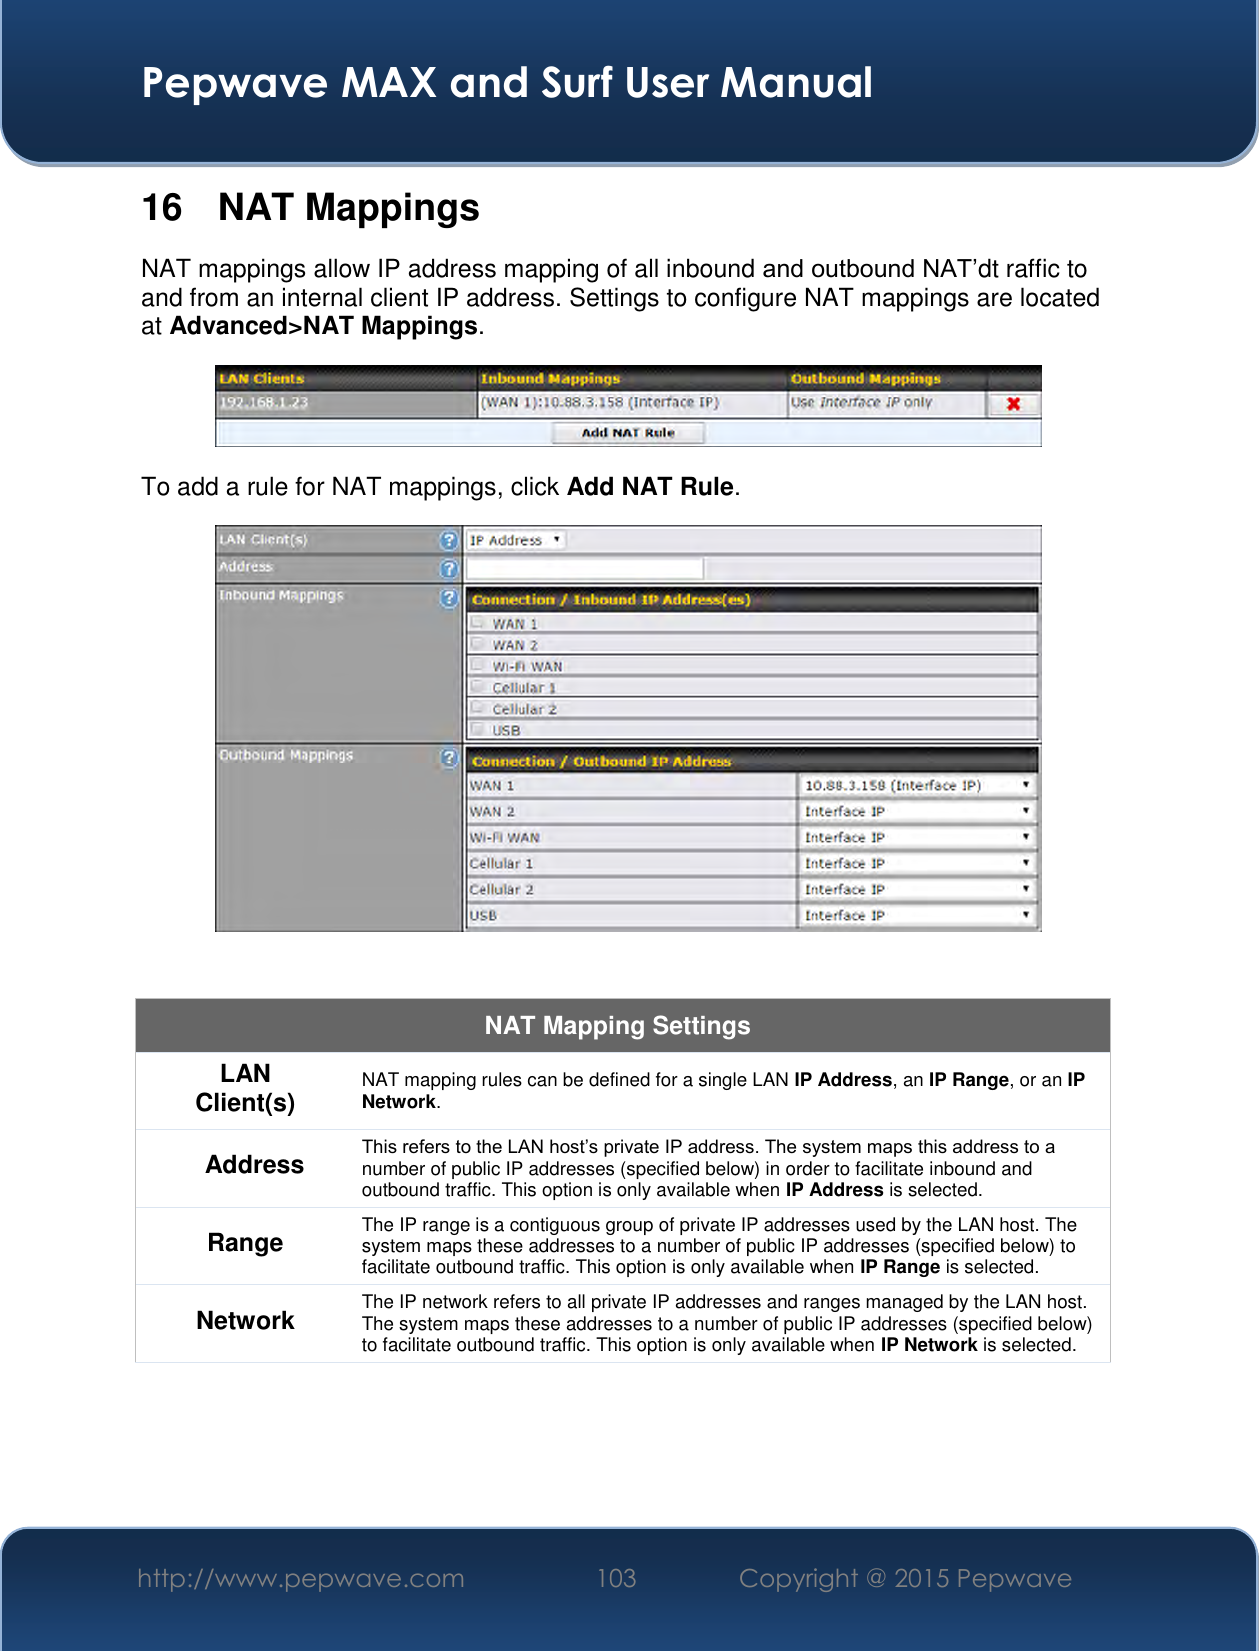  Pepwave MAX and Surf User Manual http://www.pepwave.com 103   Copyright @ 2015 Pepwave   16  NAT Mappings NAT mappings allow IP address mapping of all inbound and outbound NAT’dt raffic to and from an internal client IP address. Settings to configure NAT mappings are located at Advanced&gt;NAT Mappings.  To add a rule for NAT mappings, click Add NAT Rule.   NAT Mapping Settings LAN Client(s) NAT mapping rules can be defined for a single LAN IP Address, an IP Range, or an IP Network. Address This refers to the LAN host’s private IP address. The system maps this address to a number of public IP addresses (specified below) in order to facilitate inbound and outbound traffic. This option is only available when IP Address is selected. Range The IP range is a contiguous group of private IP addresses used by the LAN host. The system maps these addresses to a number of public IP addresses (specified below) to facilitate outbound traffic. This option is only available when IP Range is selected. Network The IP network refers to all private IP addresses and ranges managed by the LAN host. The system maps these addresses to a number of public IP addresses (specified below) to facilitate outbound traffic. This option is only available when IP Network is selected. 